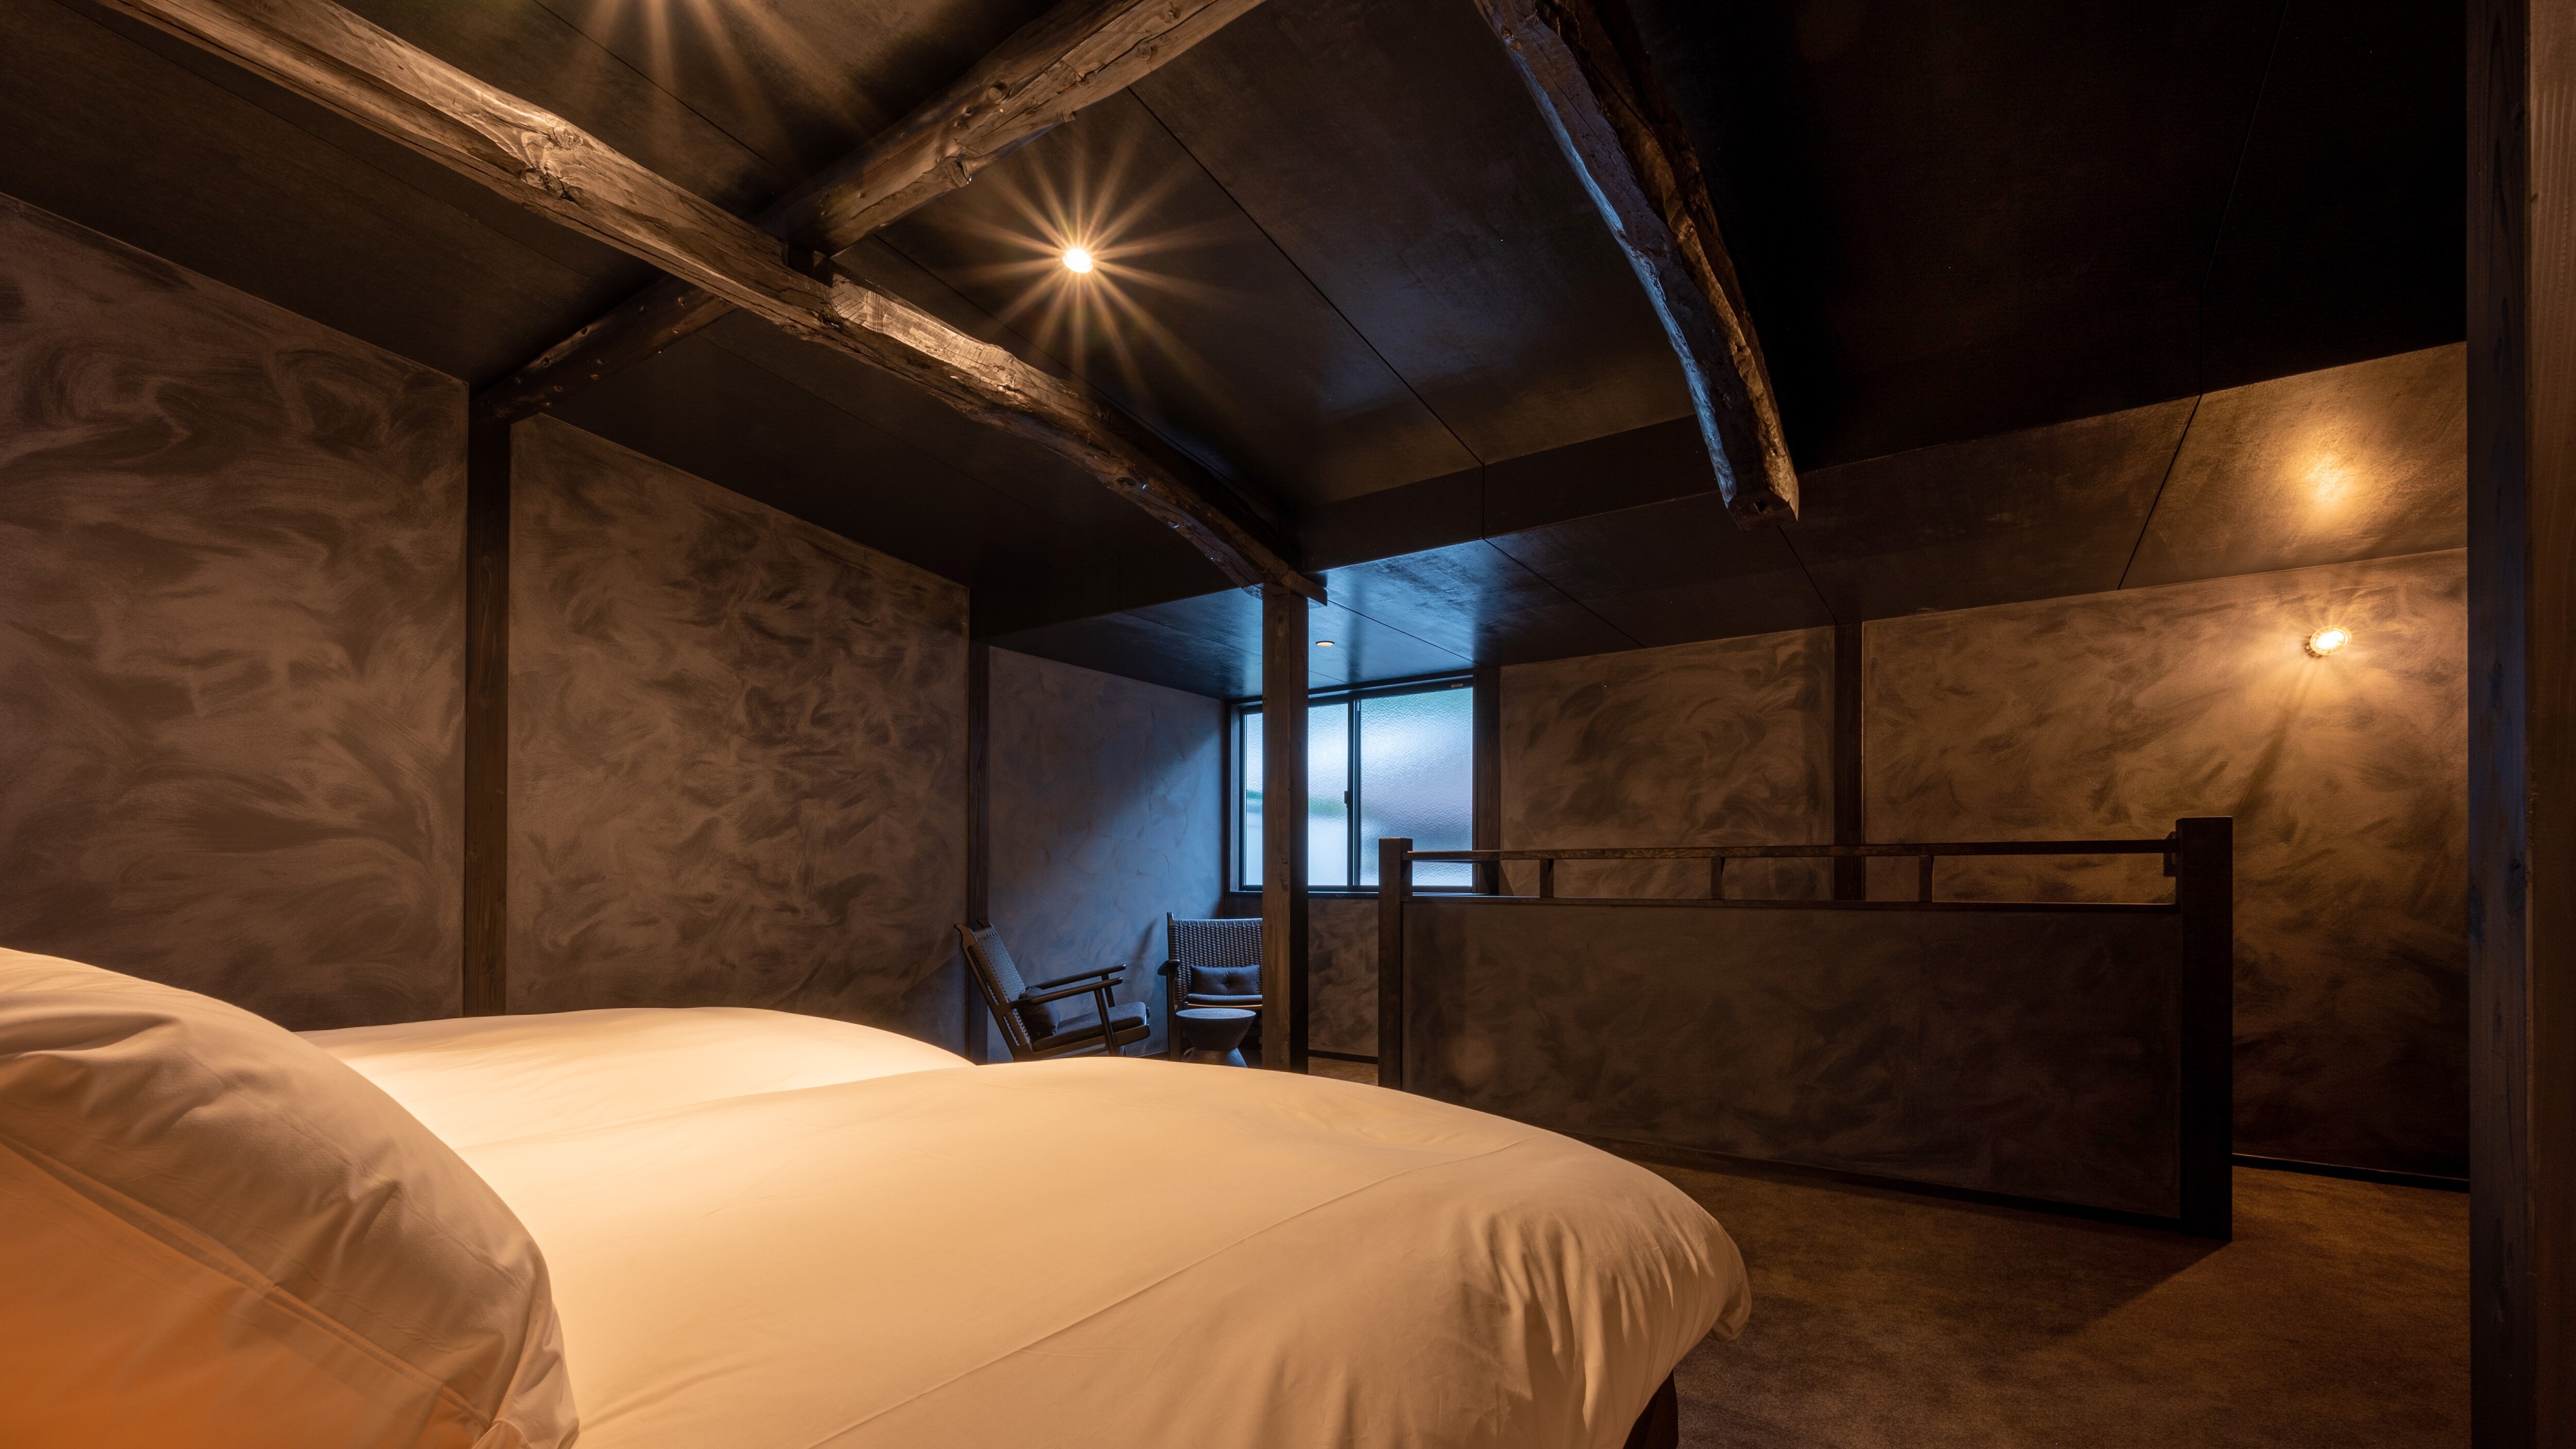 [Ueharaya] Hyakuju / A space of ancient and modern times where you can feel the rhythm of beams / With a semi-open-air bath